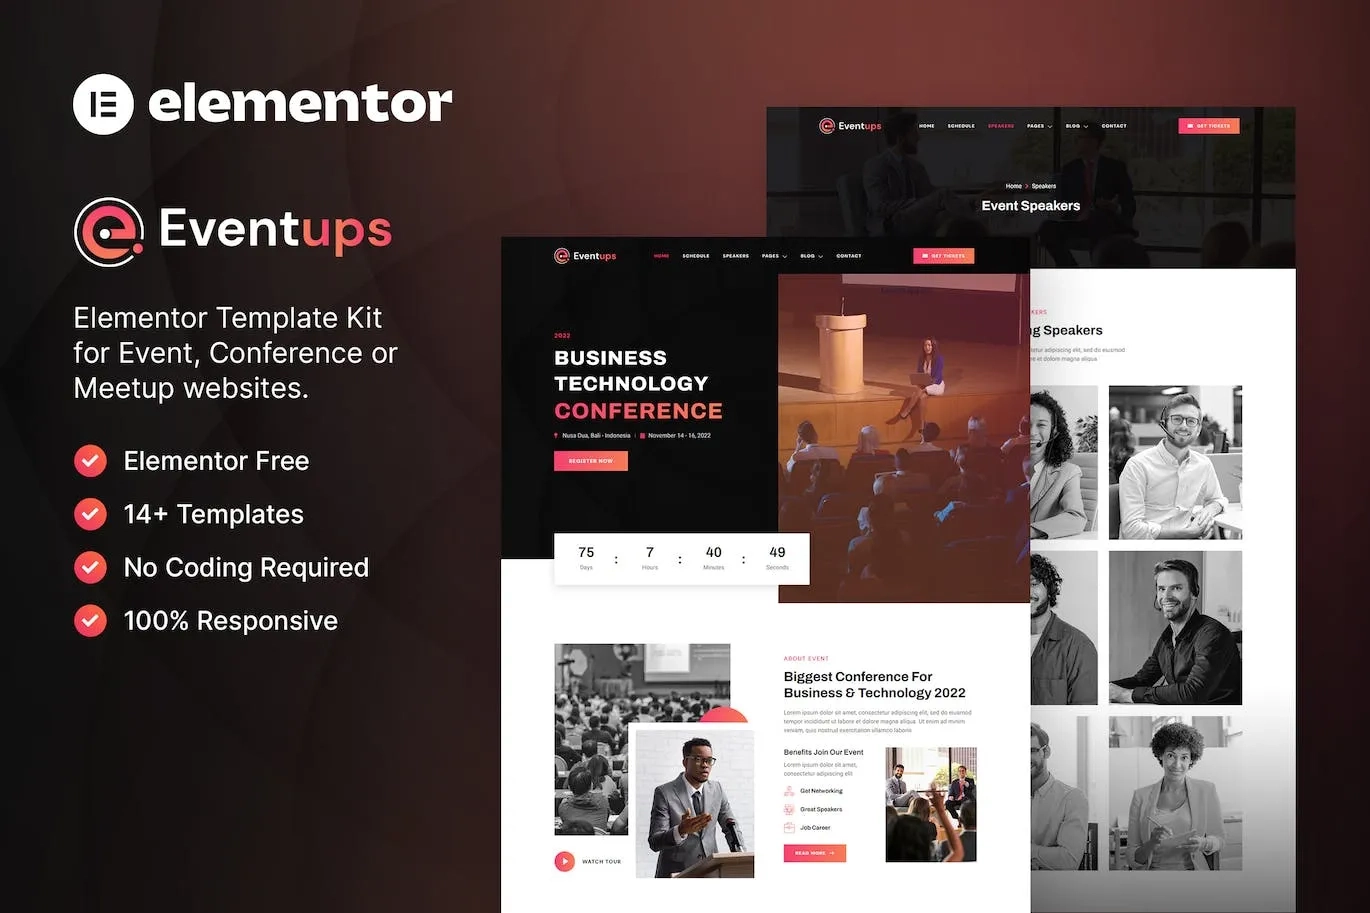 Eventups Event And Conference Elementor Template Kit 27 1697794958 1